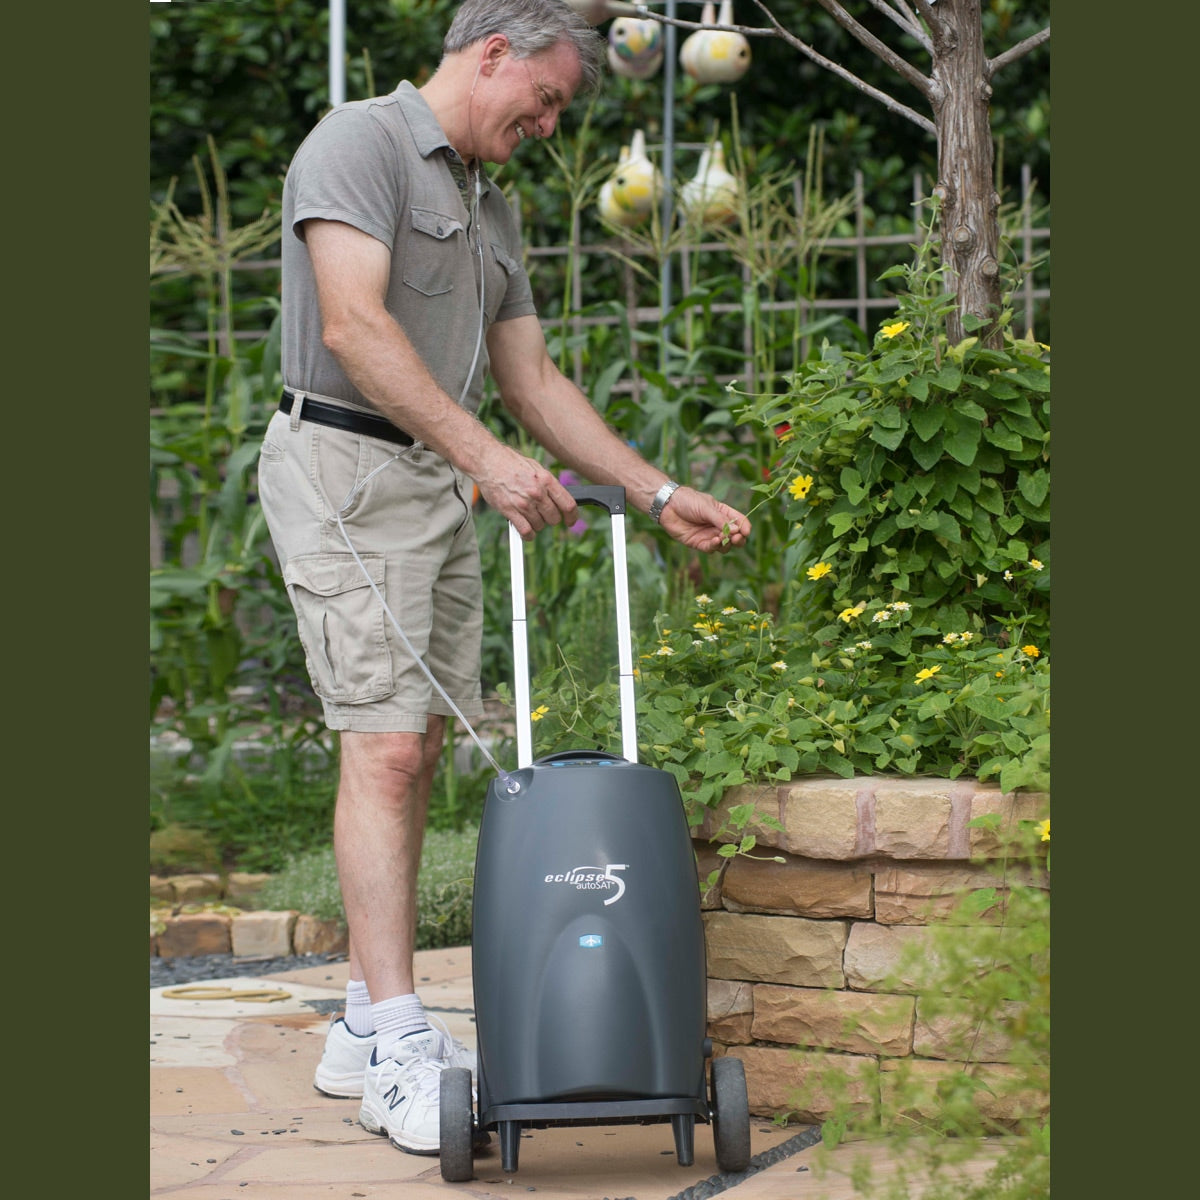 Eclipse 5 Portable Oxygen Concentrator Package - CERTIFIED PRE-OWNED